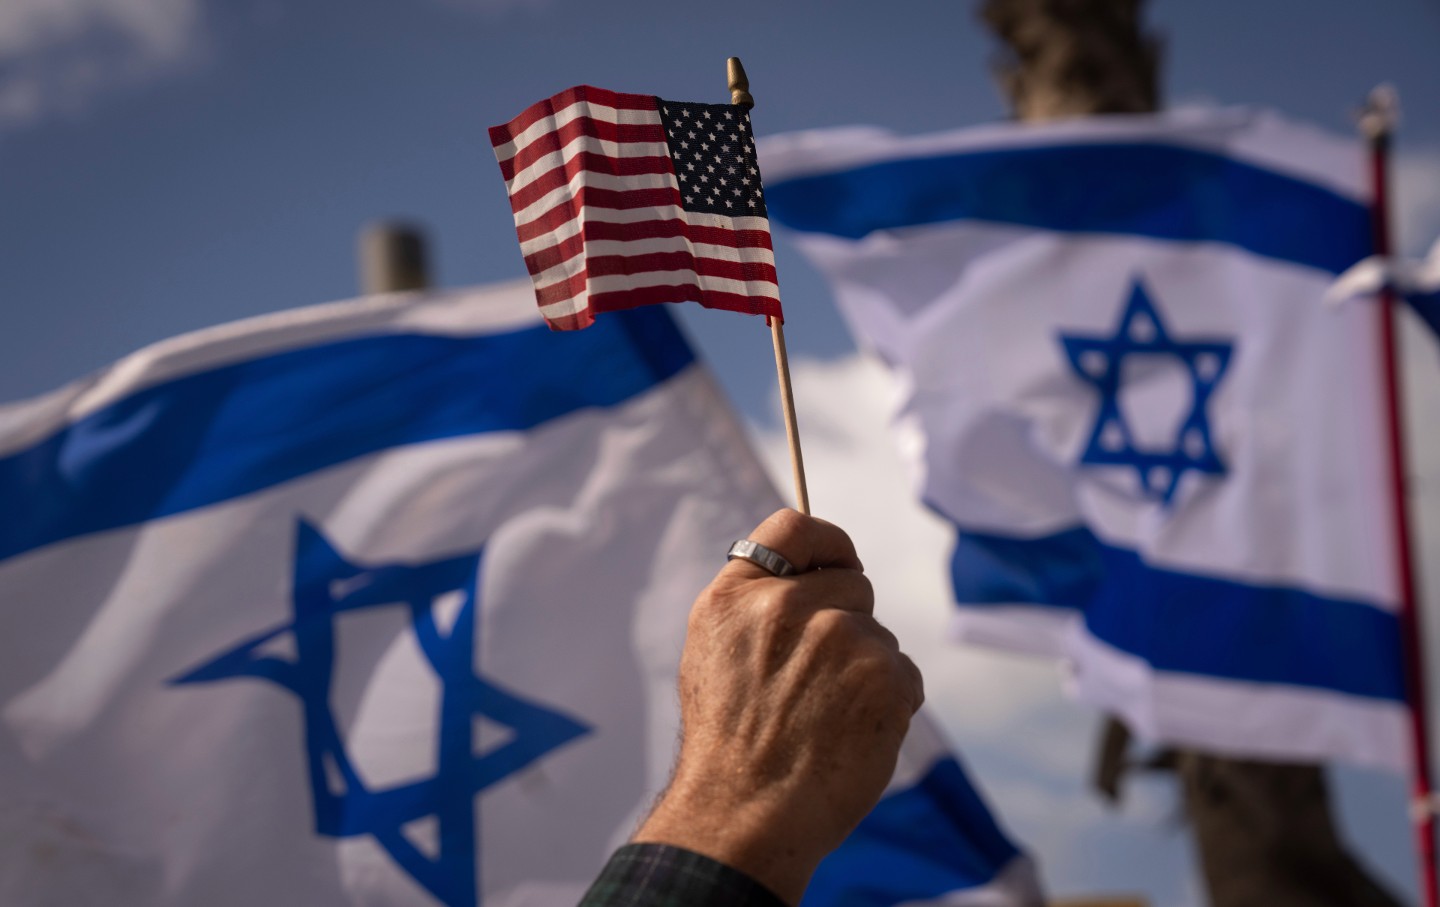 An Israeli waves a US flag during a protest against the government's judicial overhaul on Thursday, March 30, 2023.